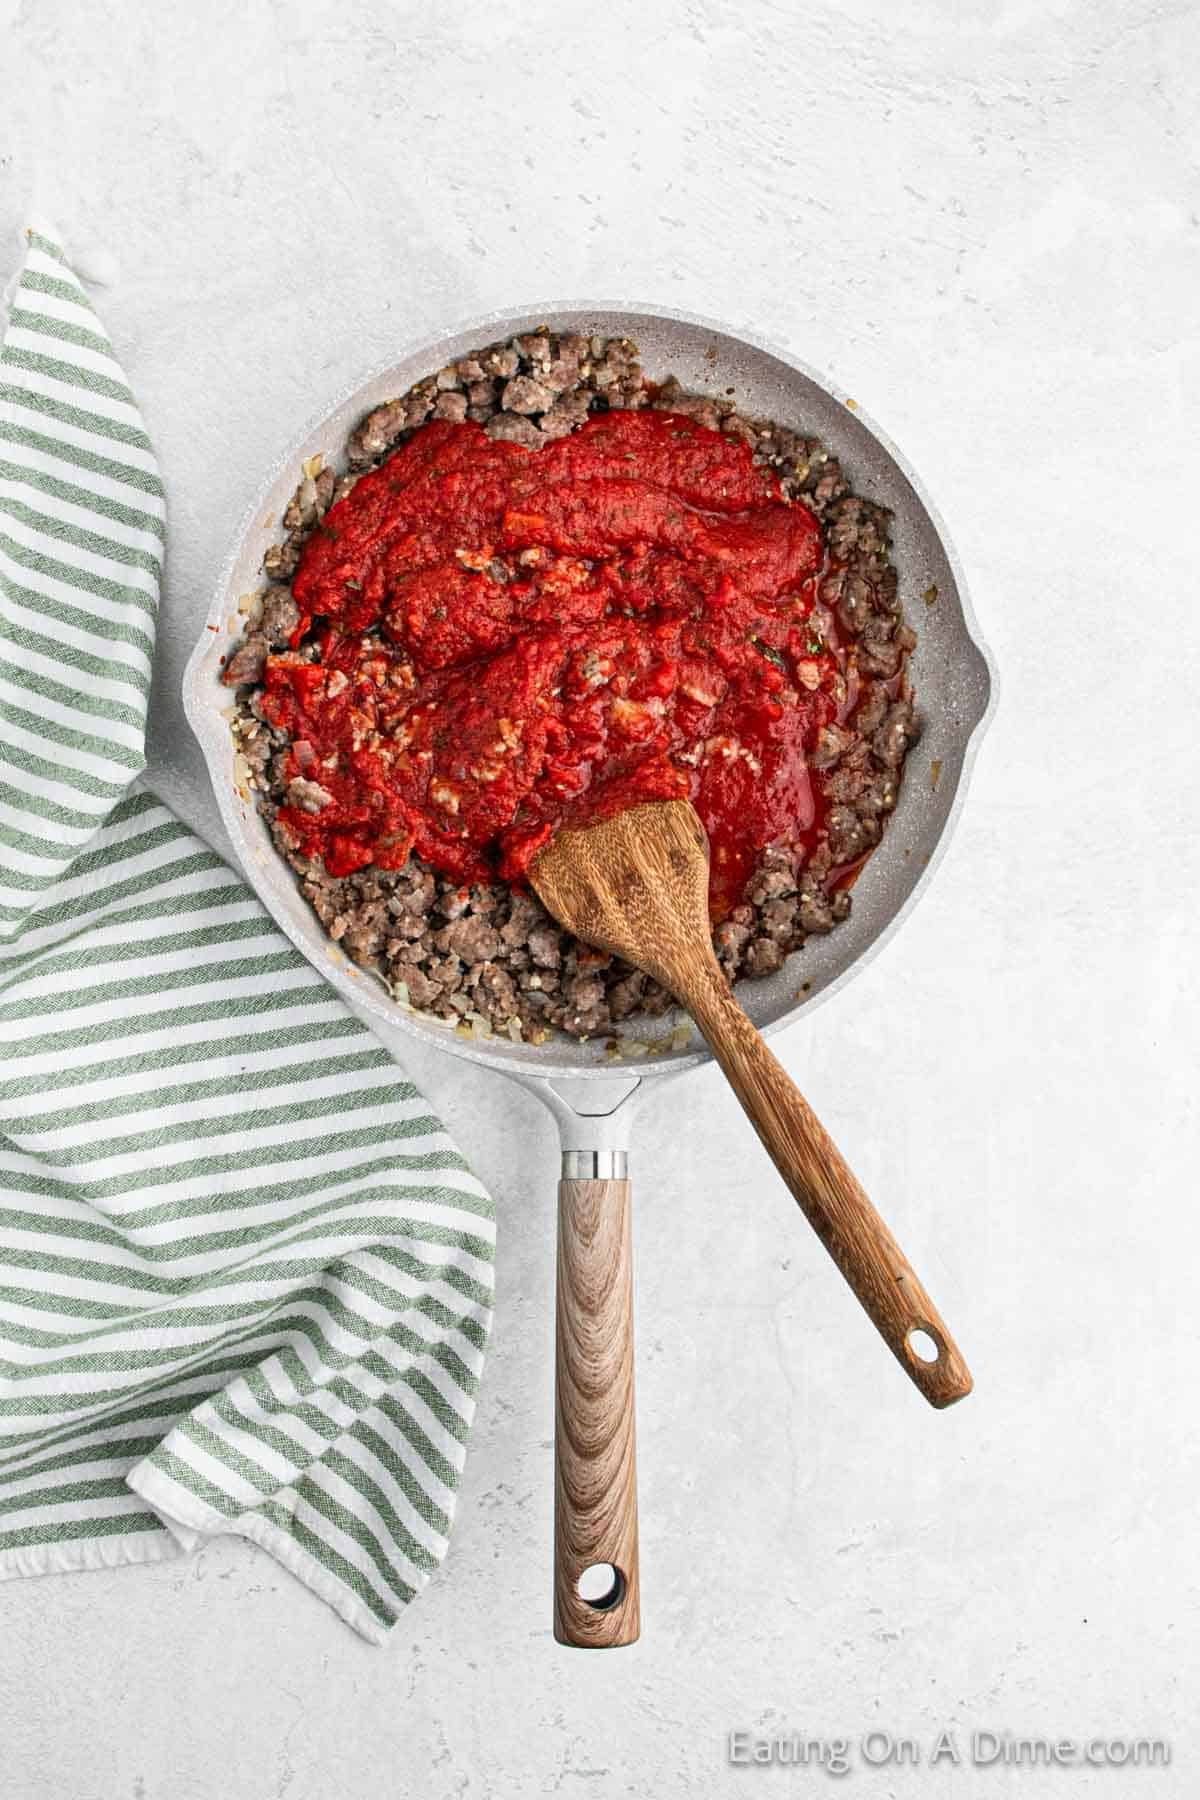 A skillet filled with cooked ground meat topped with tomato sauce, resembling a hearty million dollar spaghetti recipe, with a wooden spoon resting inside the skillet. Next to the skillet is a green and white striped towel, all set on a light-colored countertop.